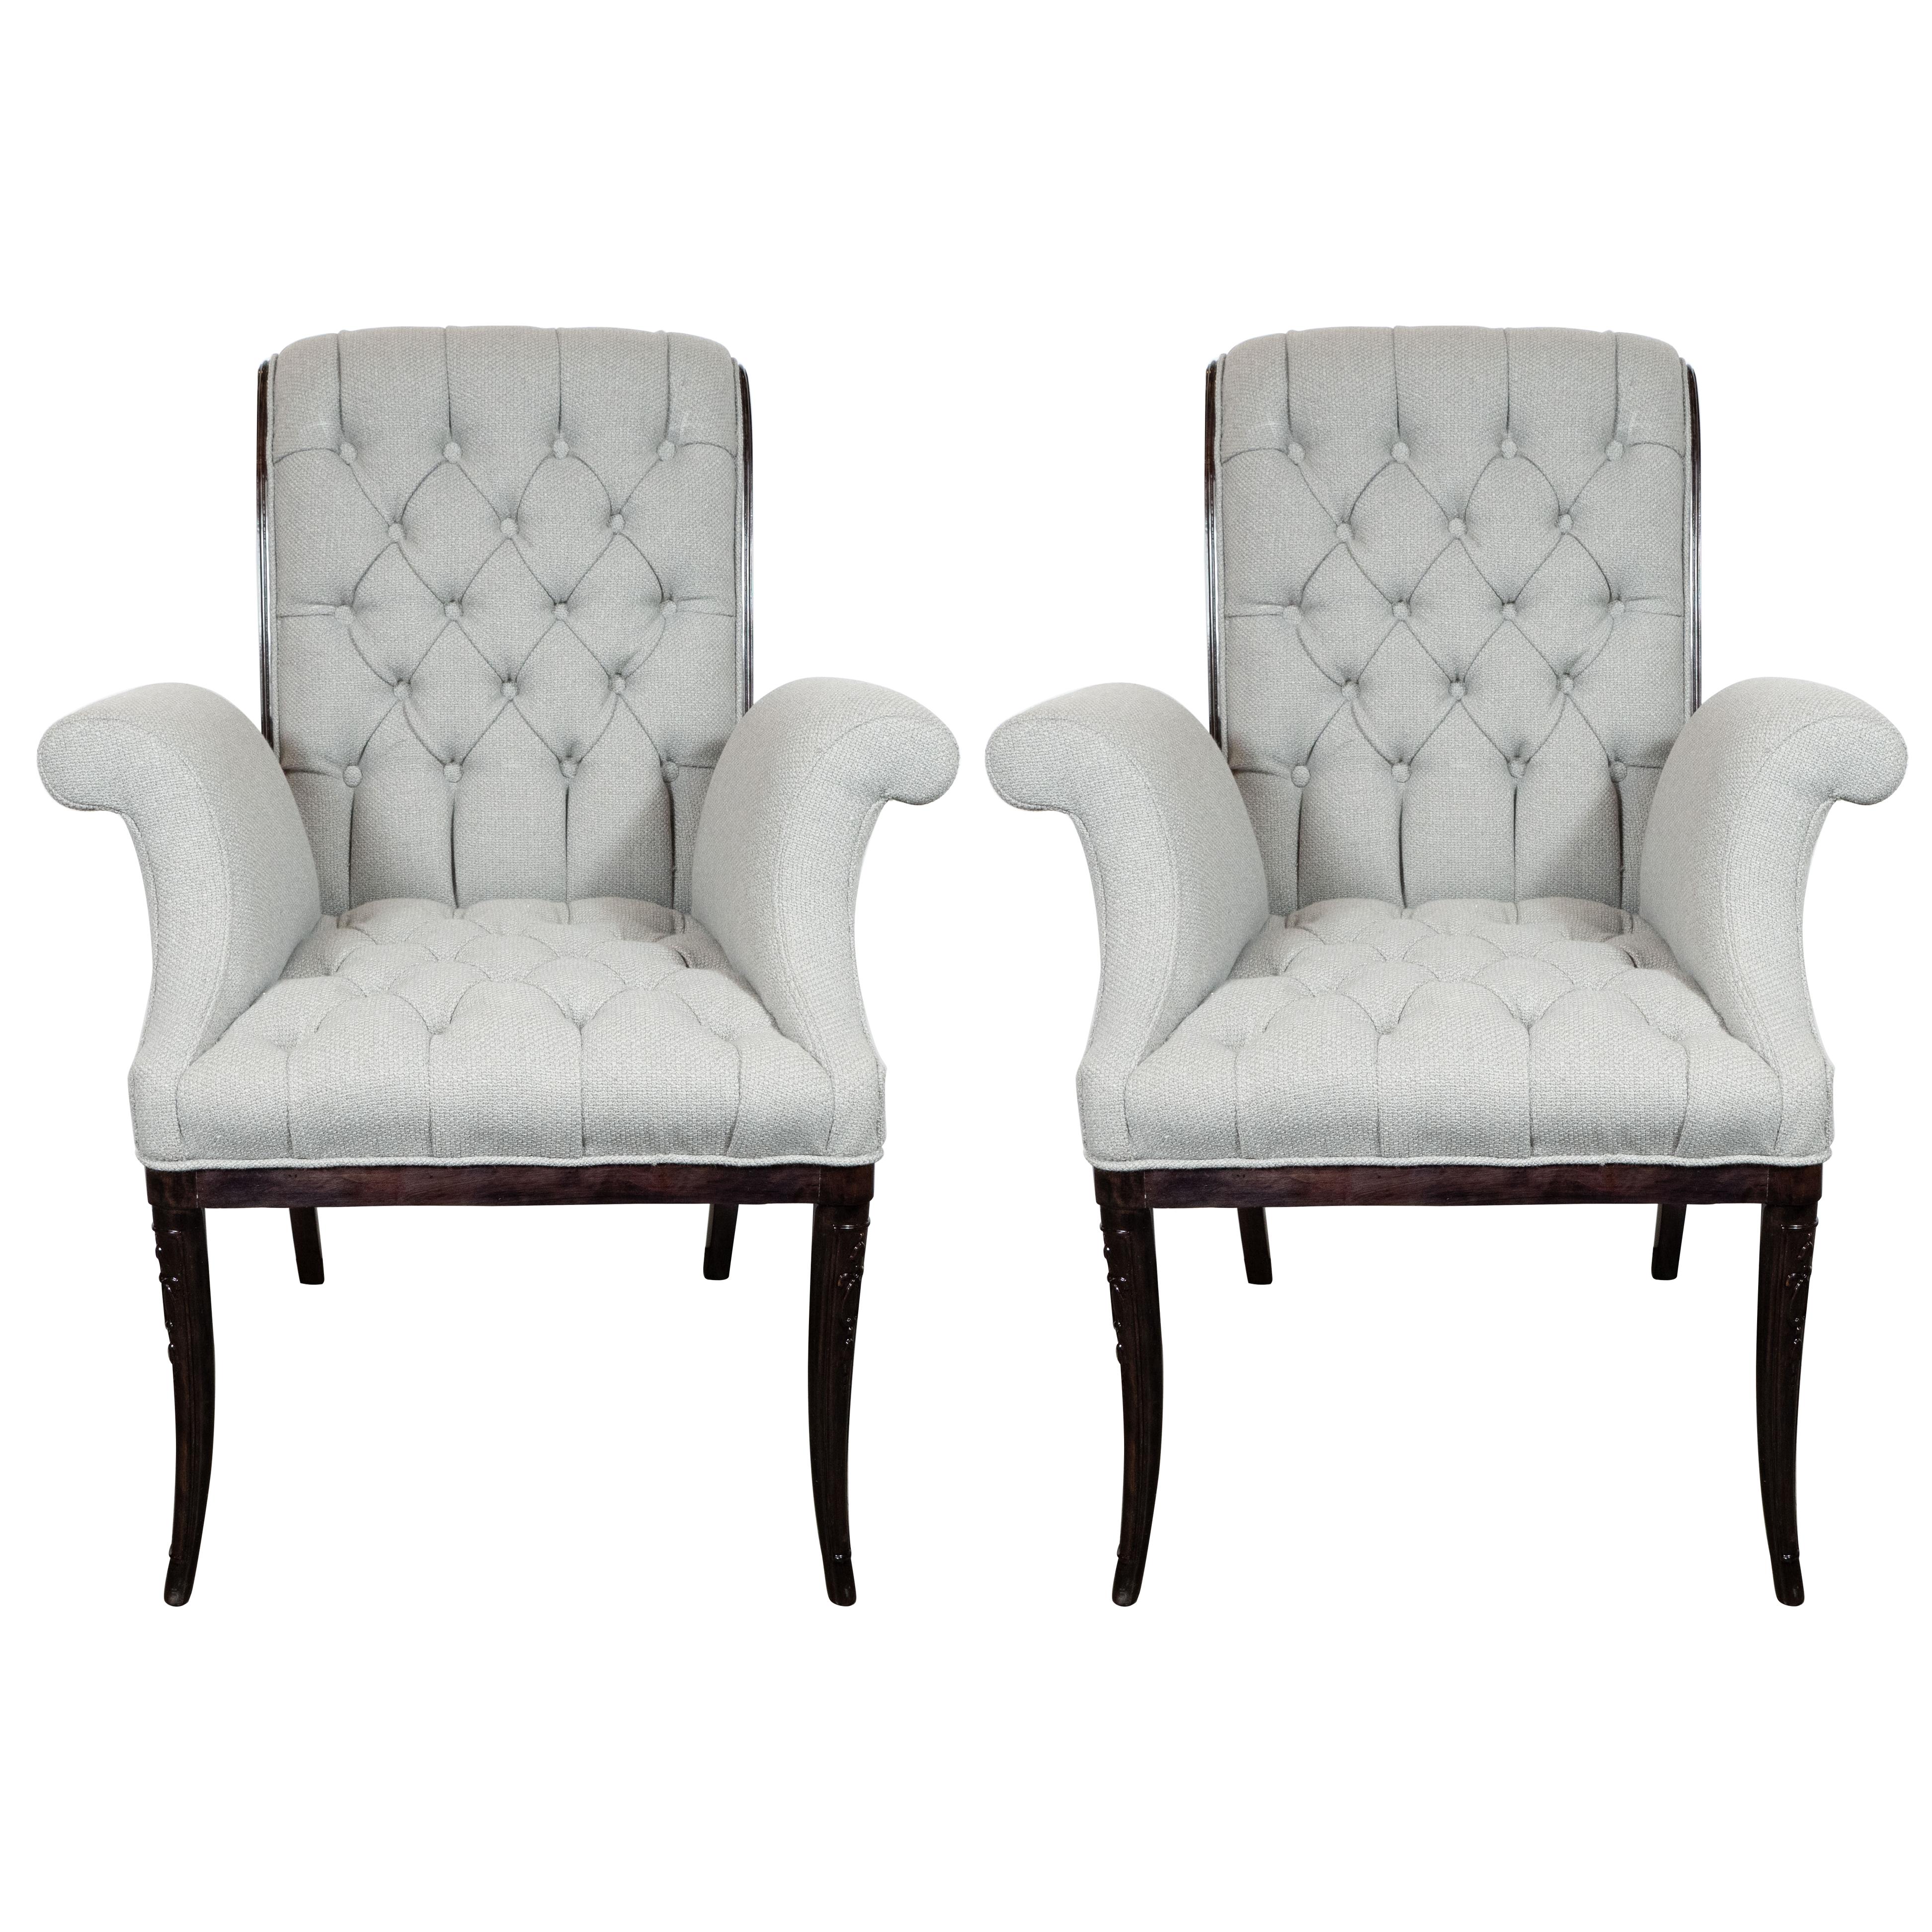 Pair of Hollywood Tufted Button Back Scroll Form Side Chairs by Grosfeld House